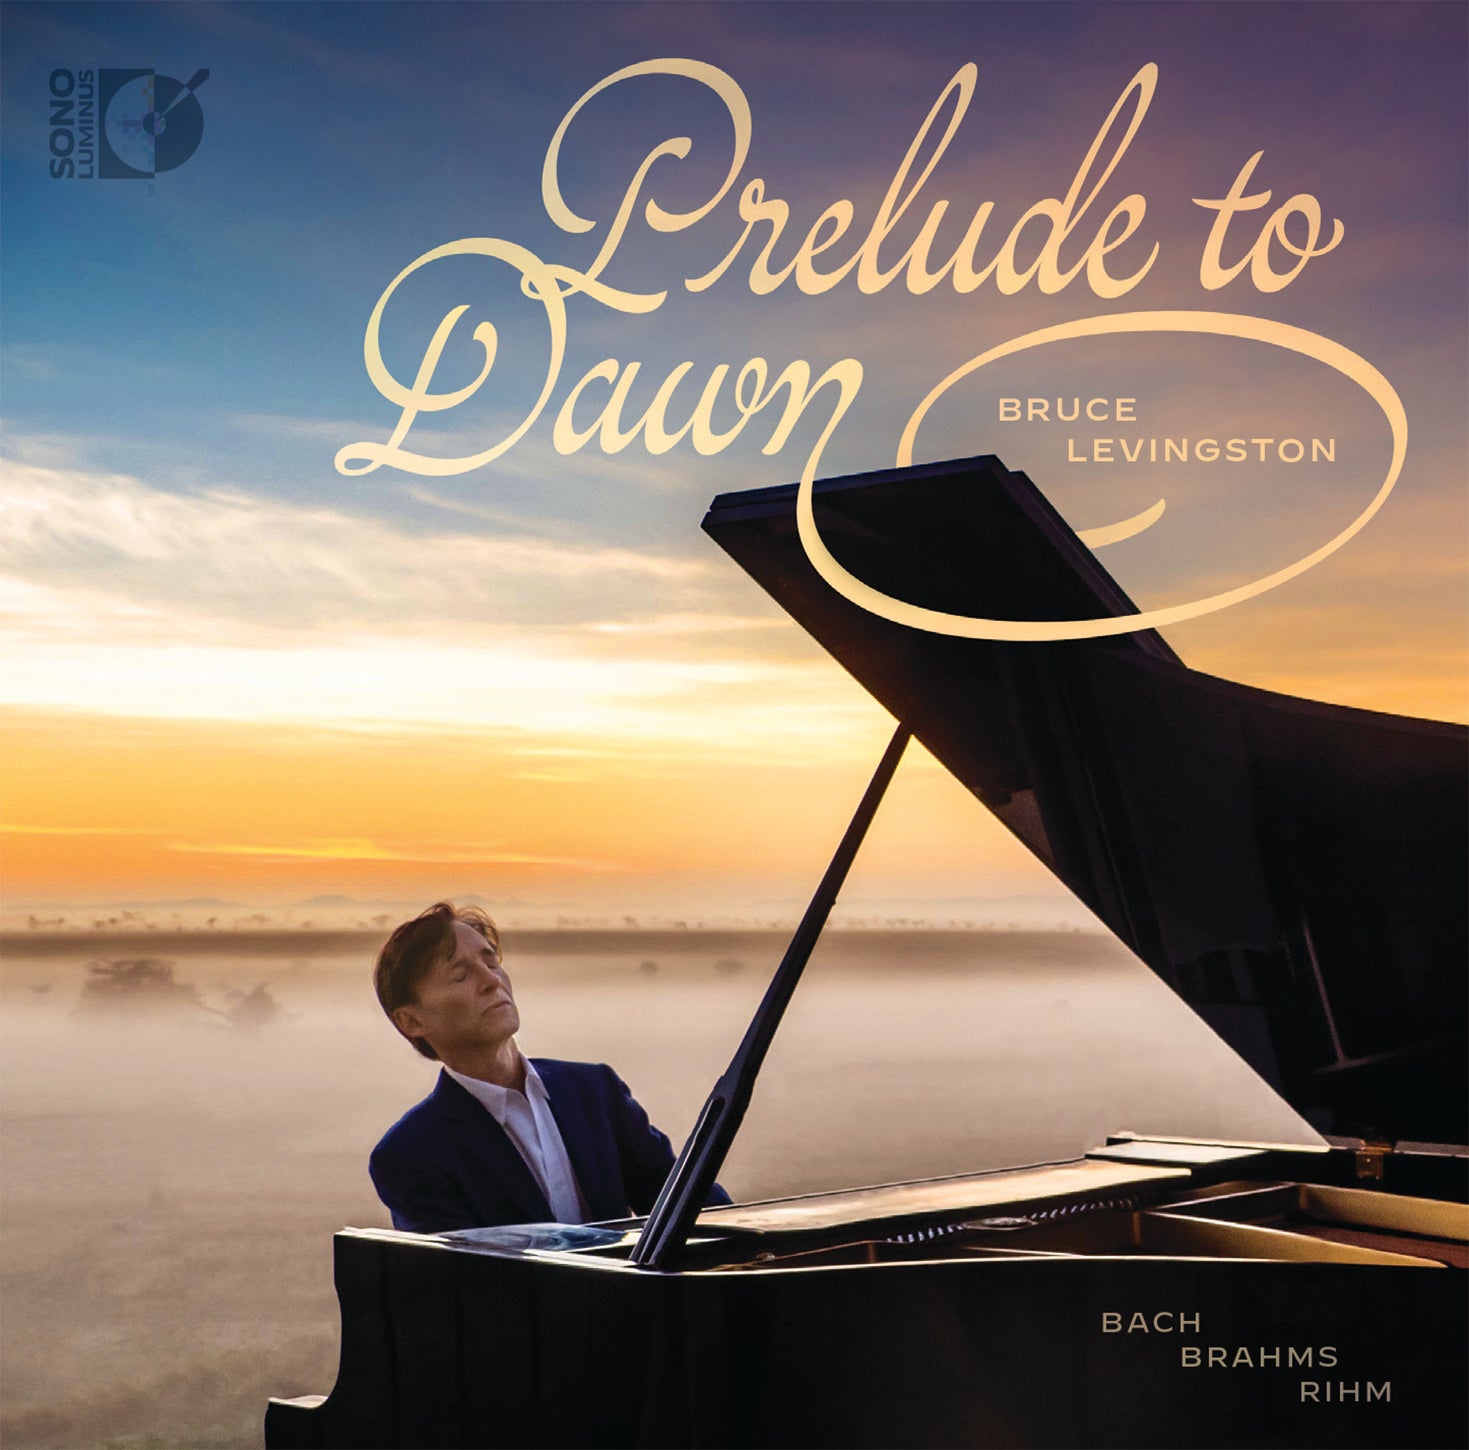 Prelude To Dawn / Bruce Levingston